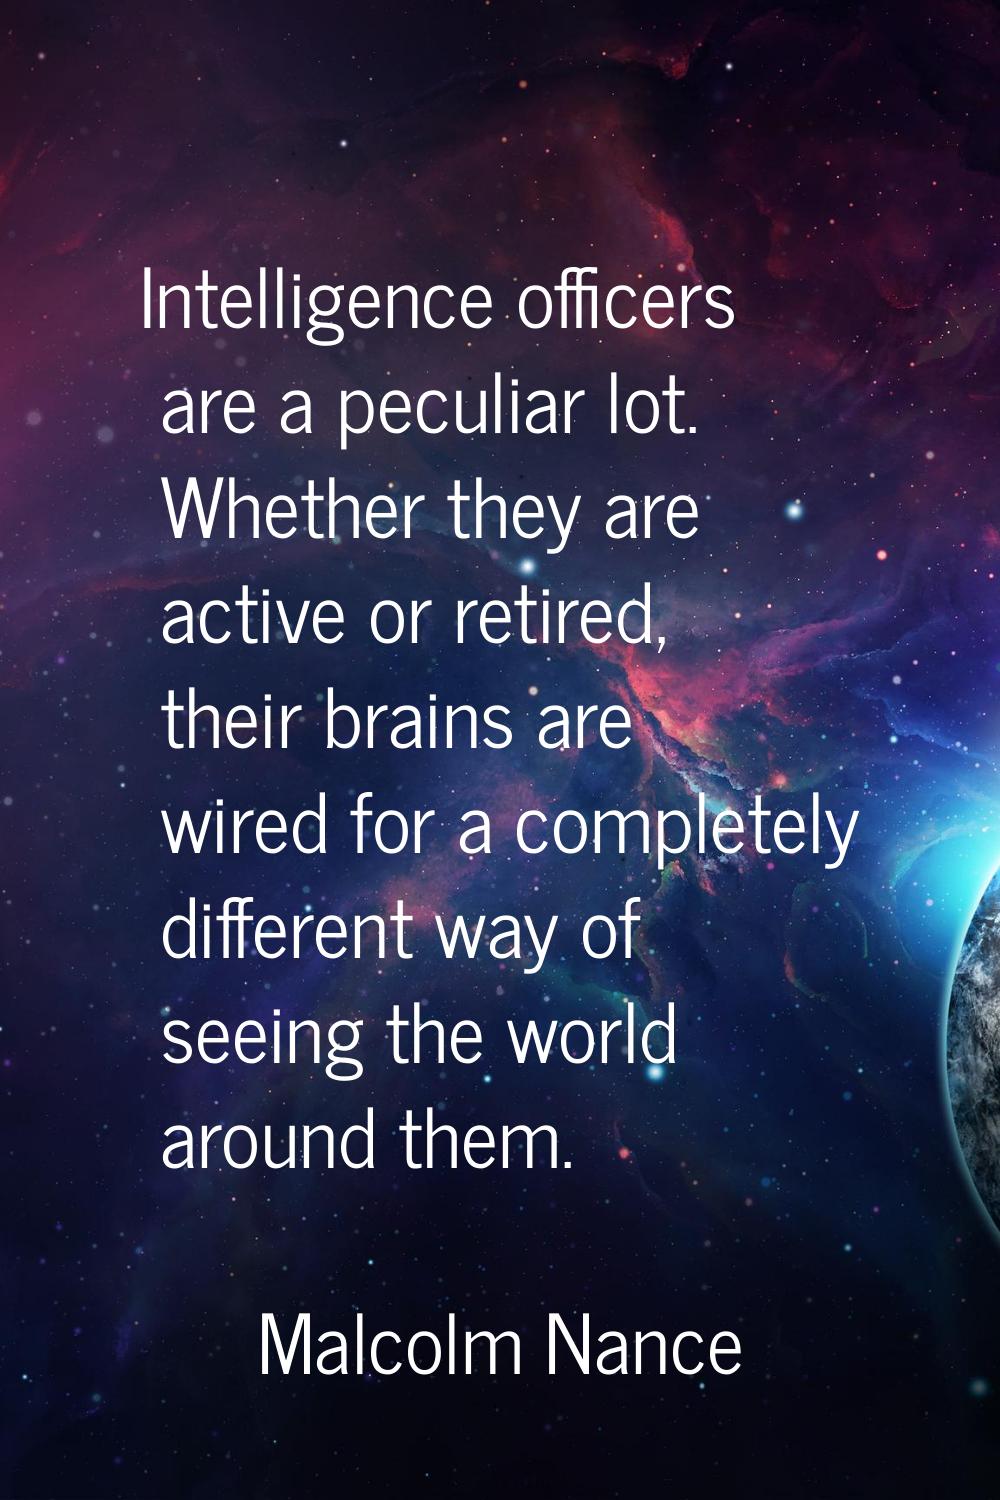 Intelligence officers are a peculiar lot. Whether they are active or retired, their brains are wire